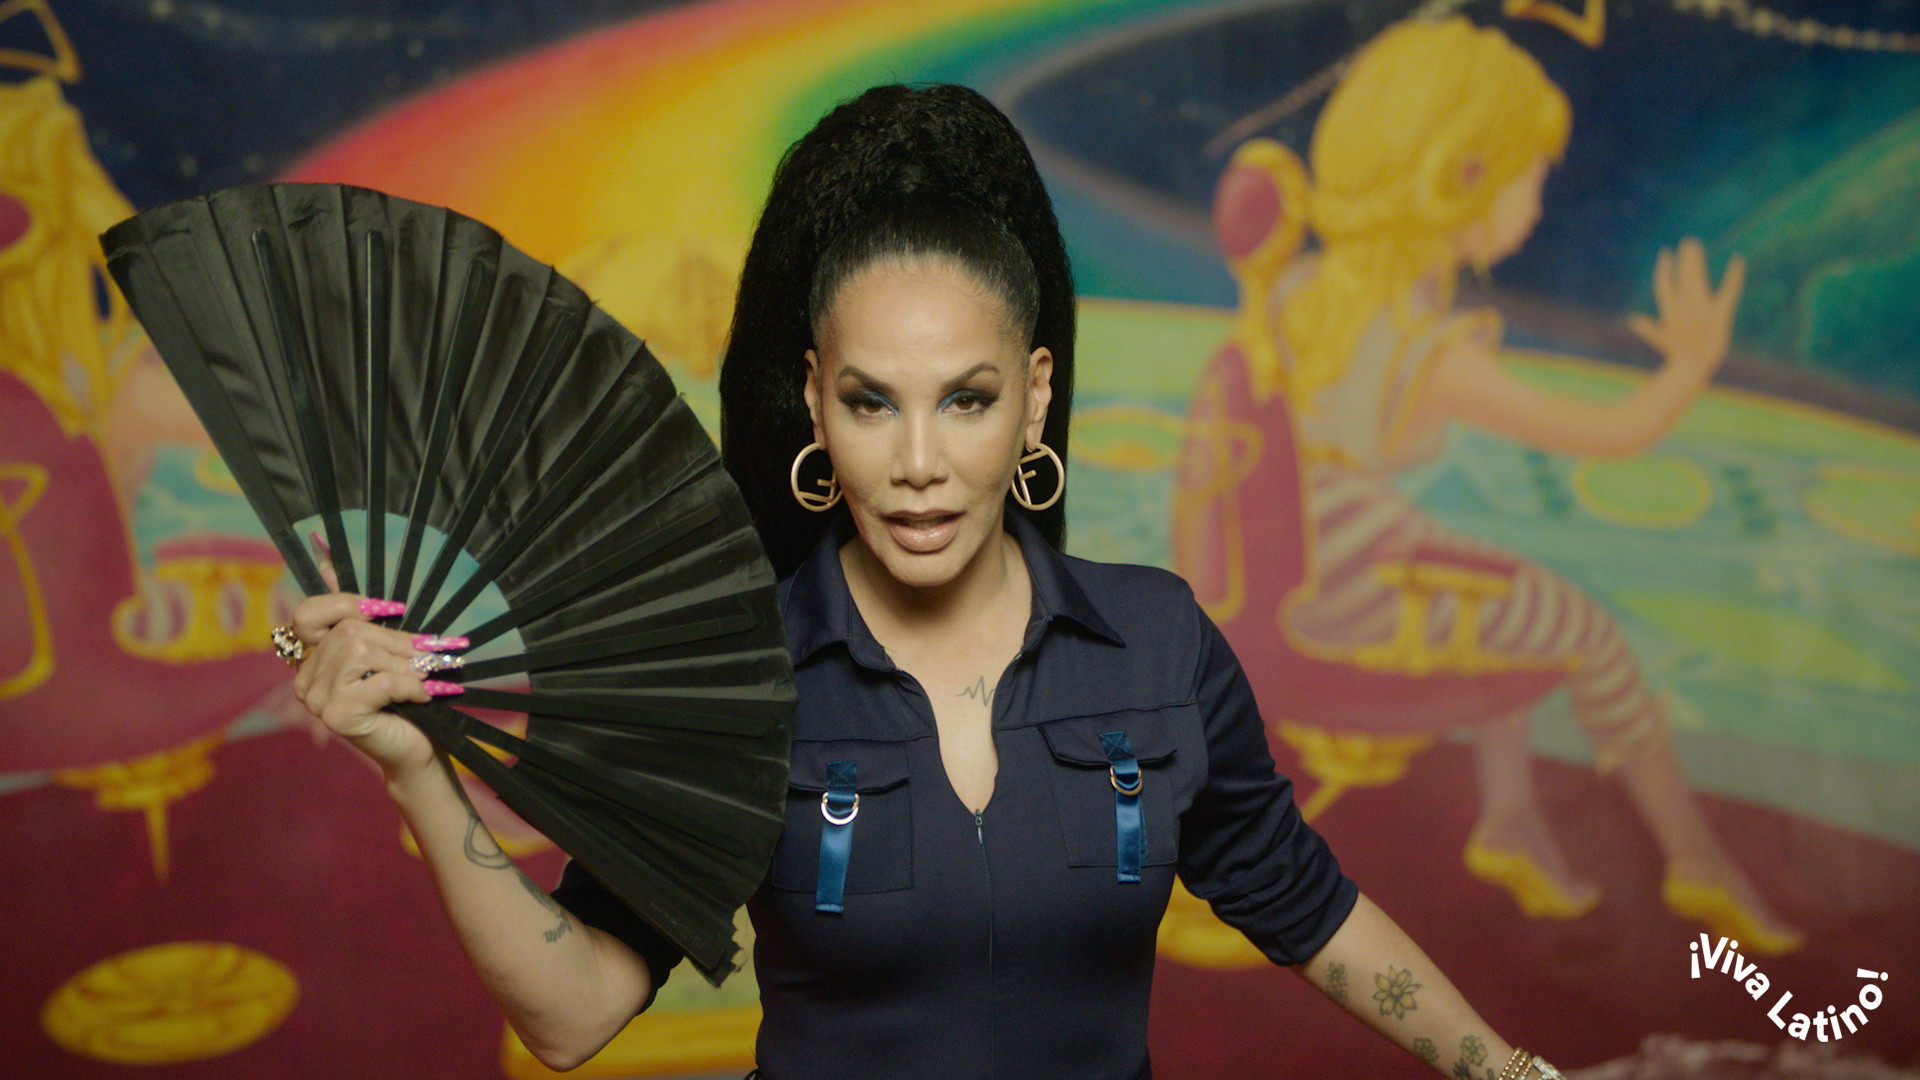 Ivy Queen Re-records Hit With Female Led Team